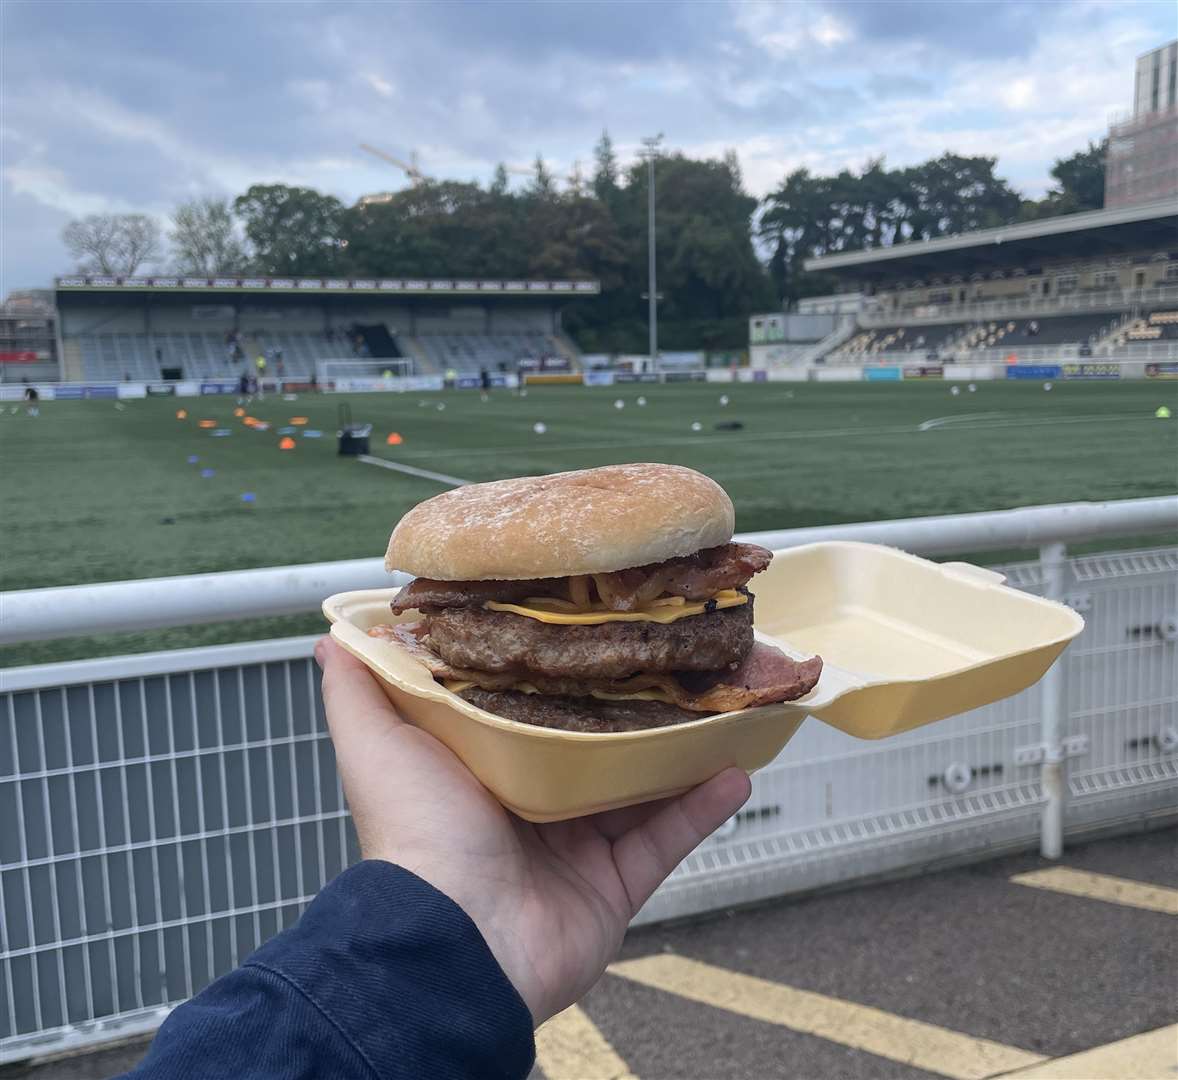 A bacon double cheeseburger at Maidstone United's Gallagher Stadium will set you back £8